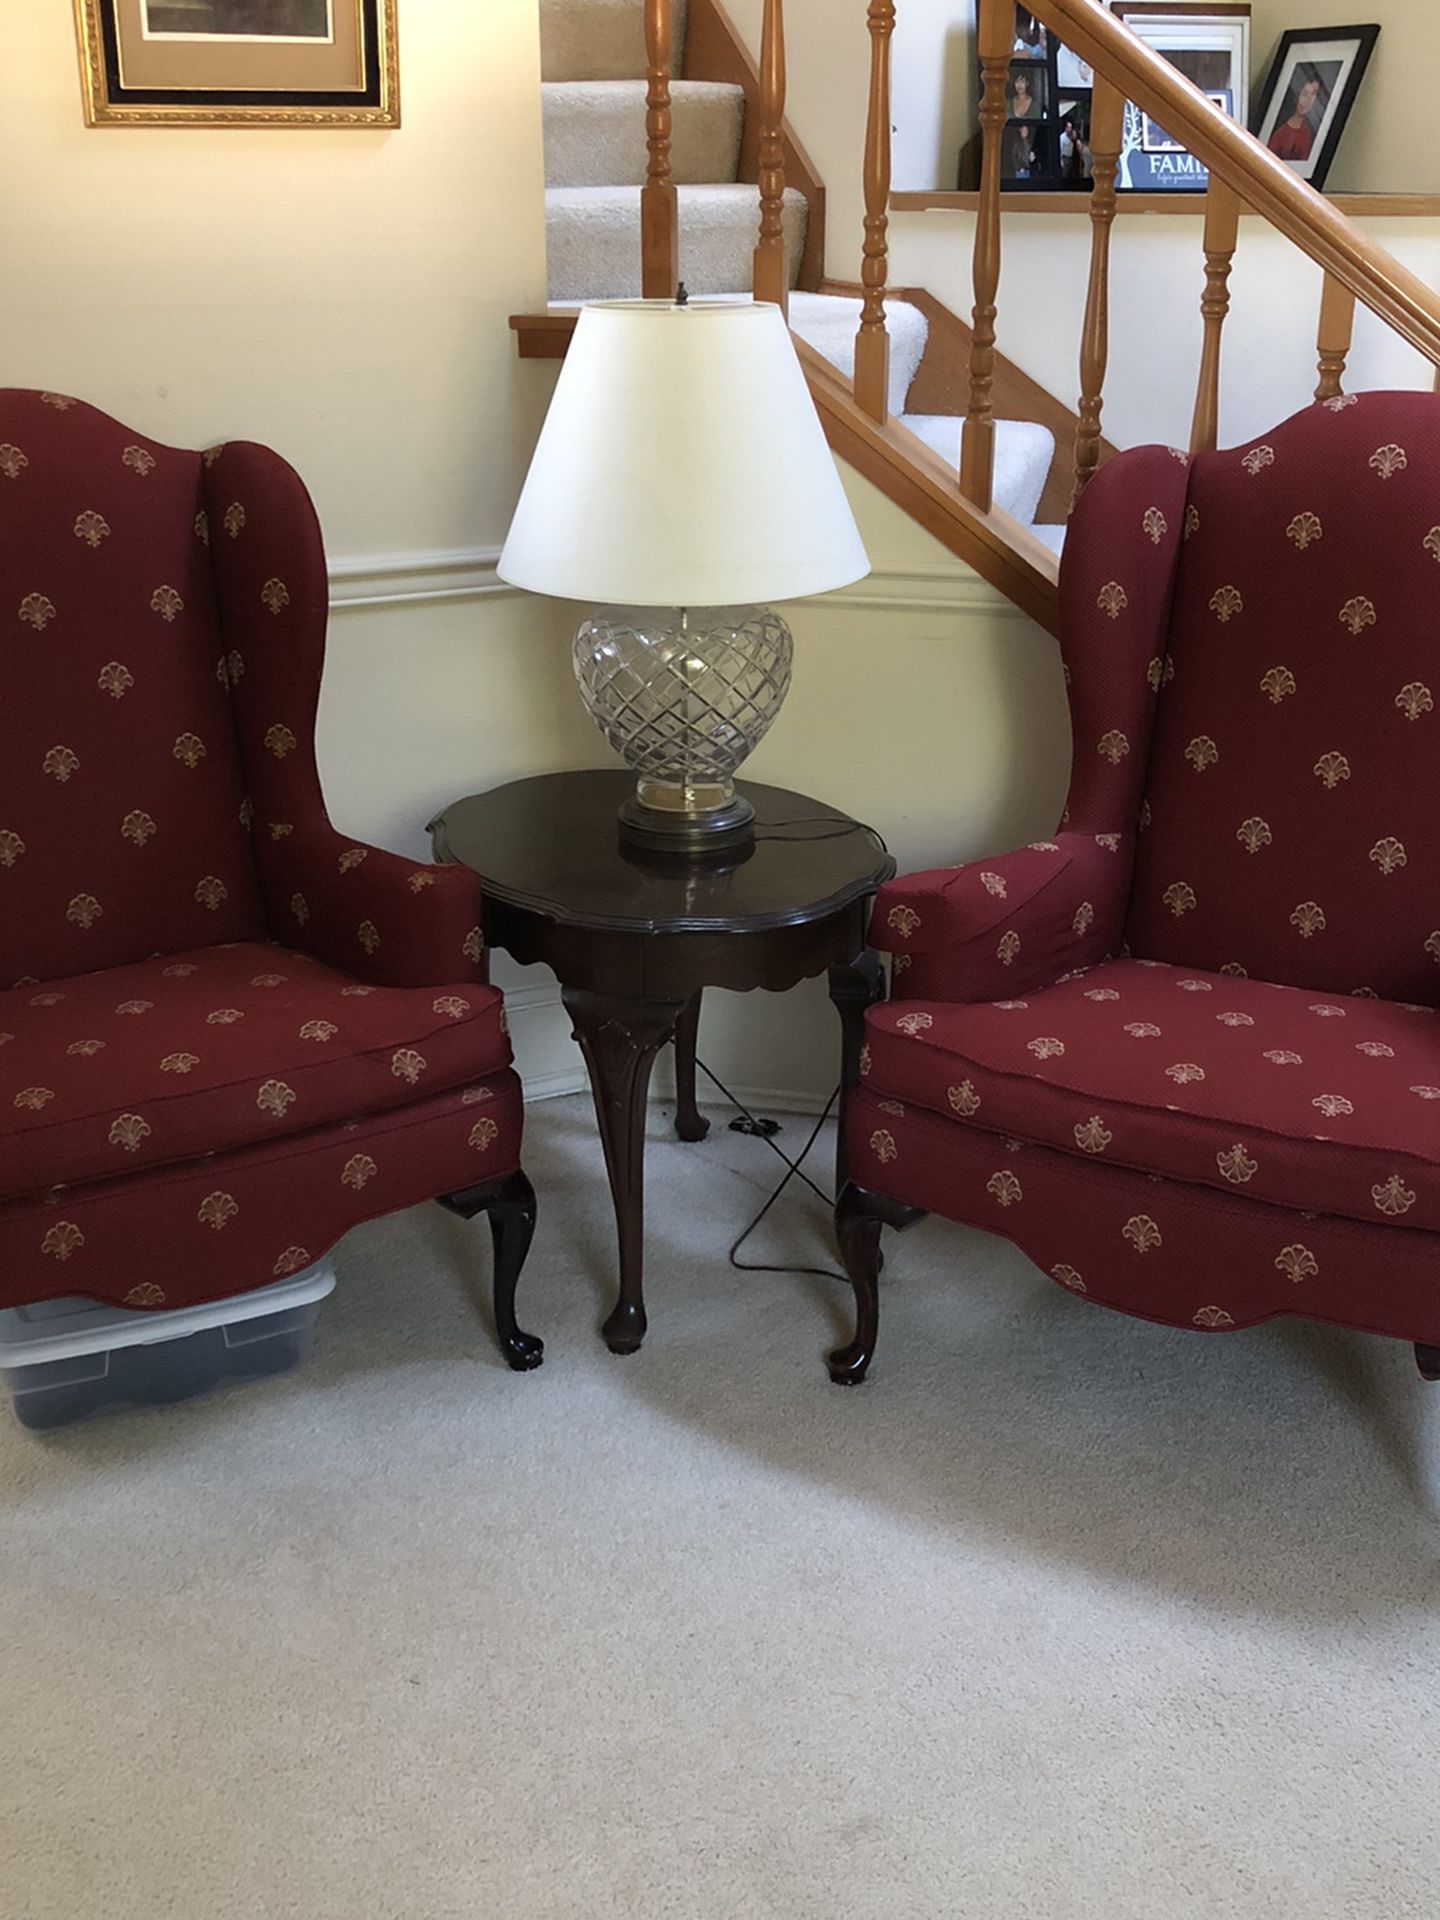 Ethan Allen Wingback Chairs